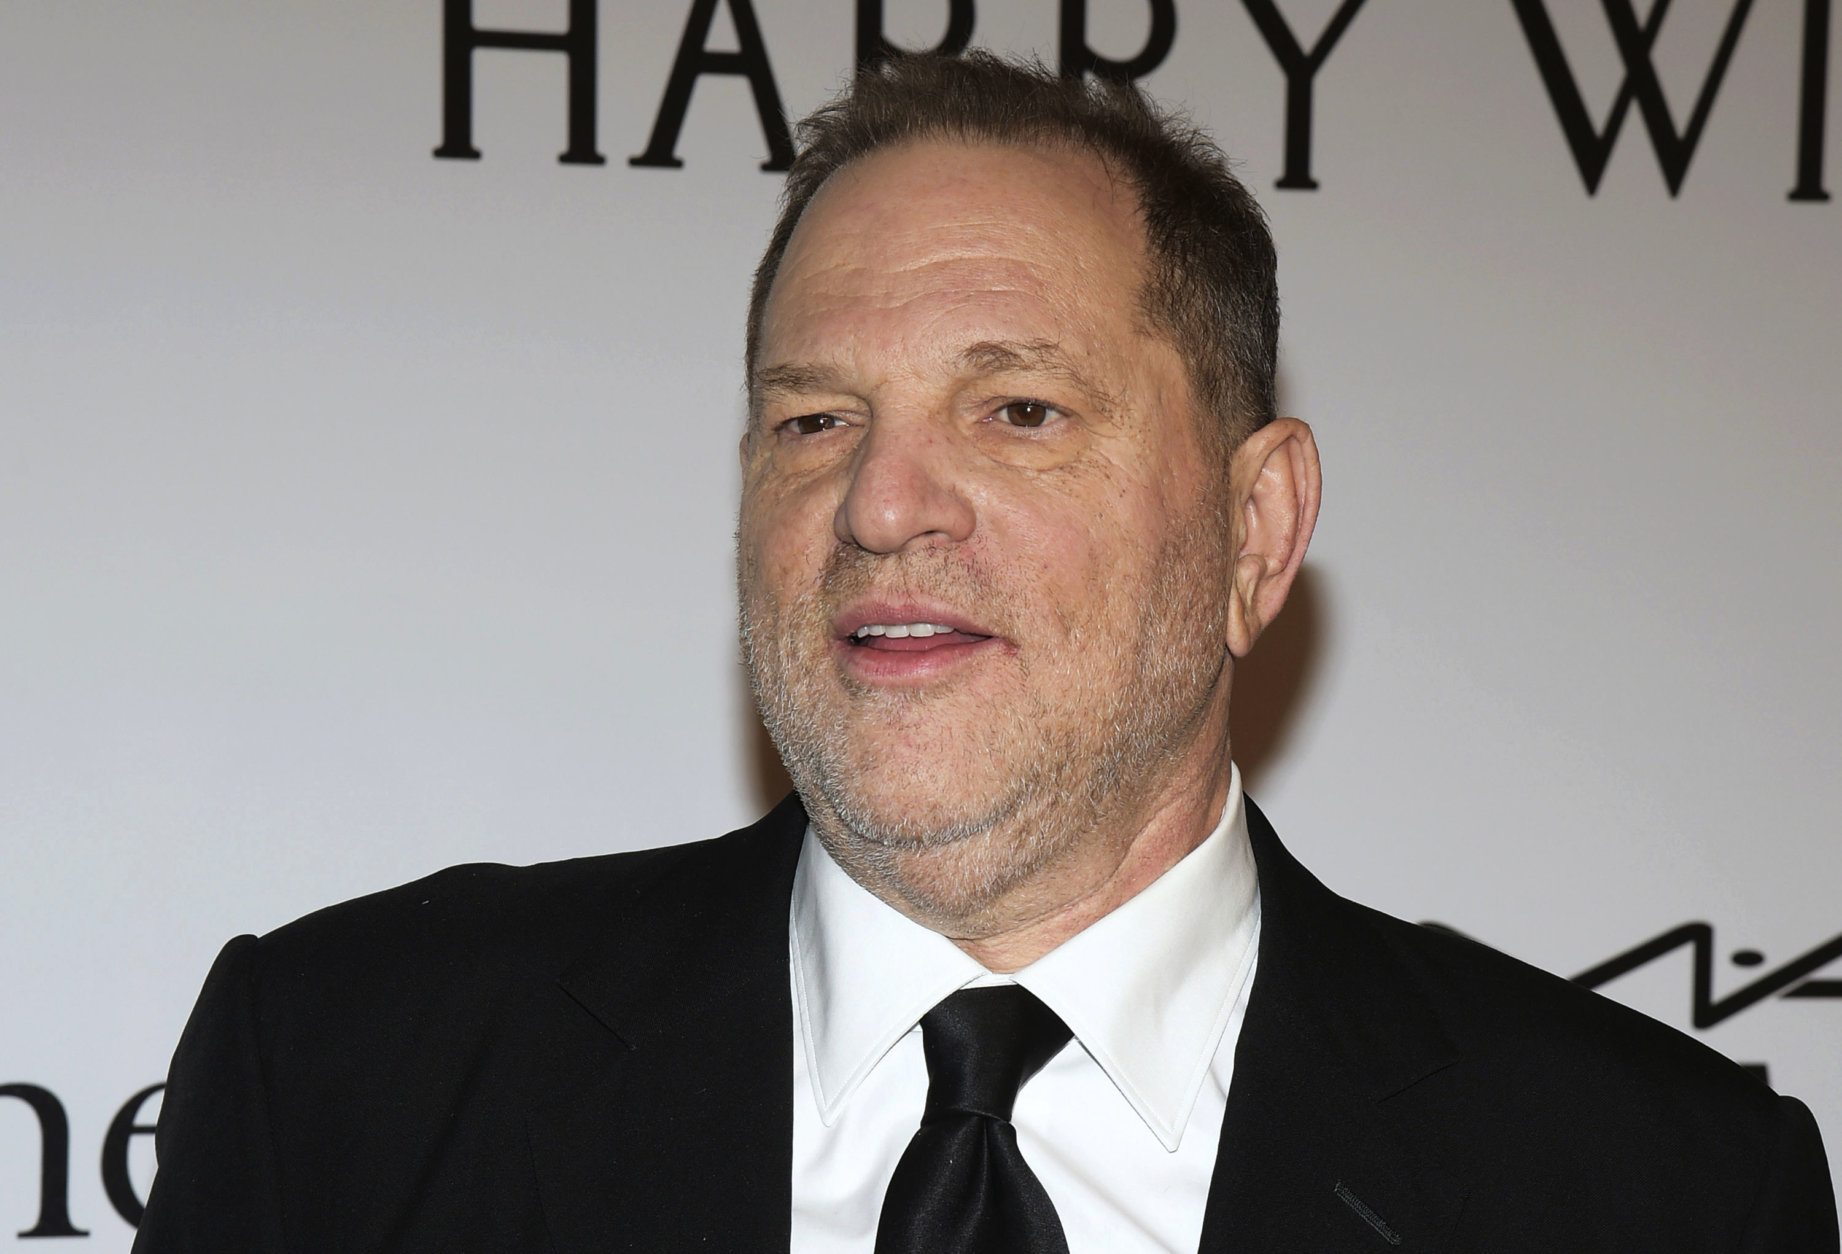 FILE - In this Feb. 10, 2016, file photo, Harvey Weinstein attends amfAR's New York Gala honoring him in New York. Harvey Weinstein's lawyer said in a court filing that federal prosecutors in New York have launched a criminal investigation into the film producer, in addition to a previously disclosed probe by the Manhattan District Attorney. (Photo by Charles Sykes/Invision/AP, File)